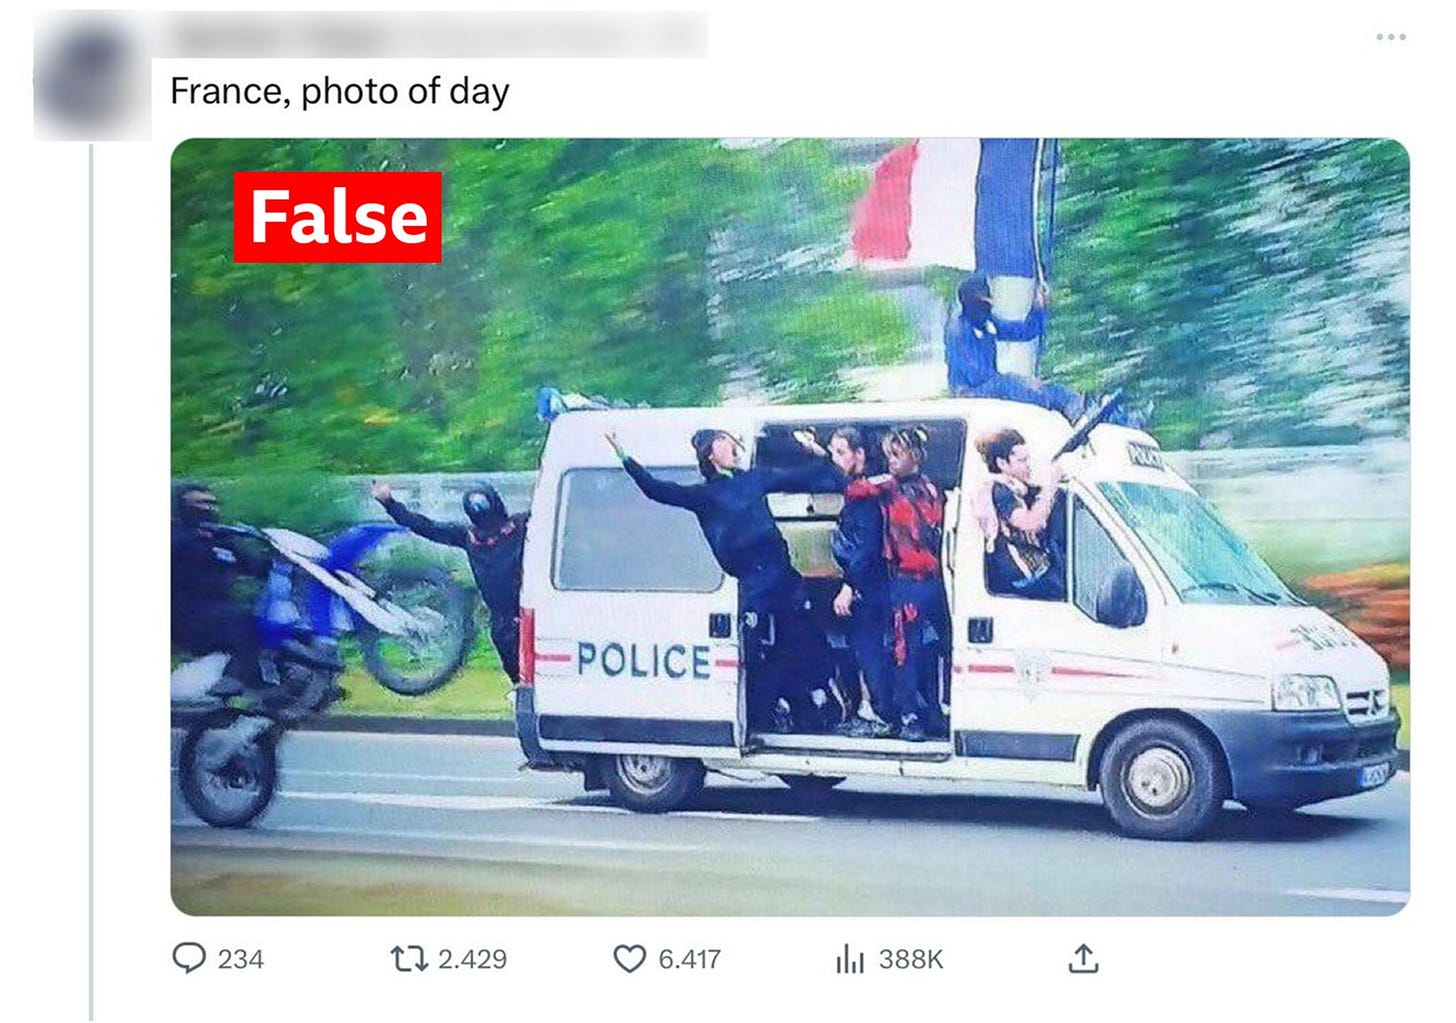 A picture of a police car with rioters taken from a tweet and and labelled "False"